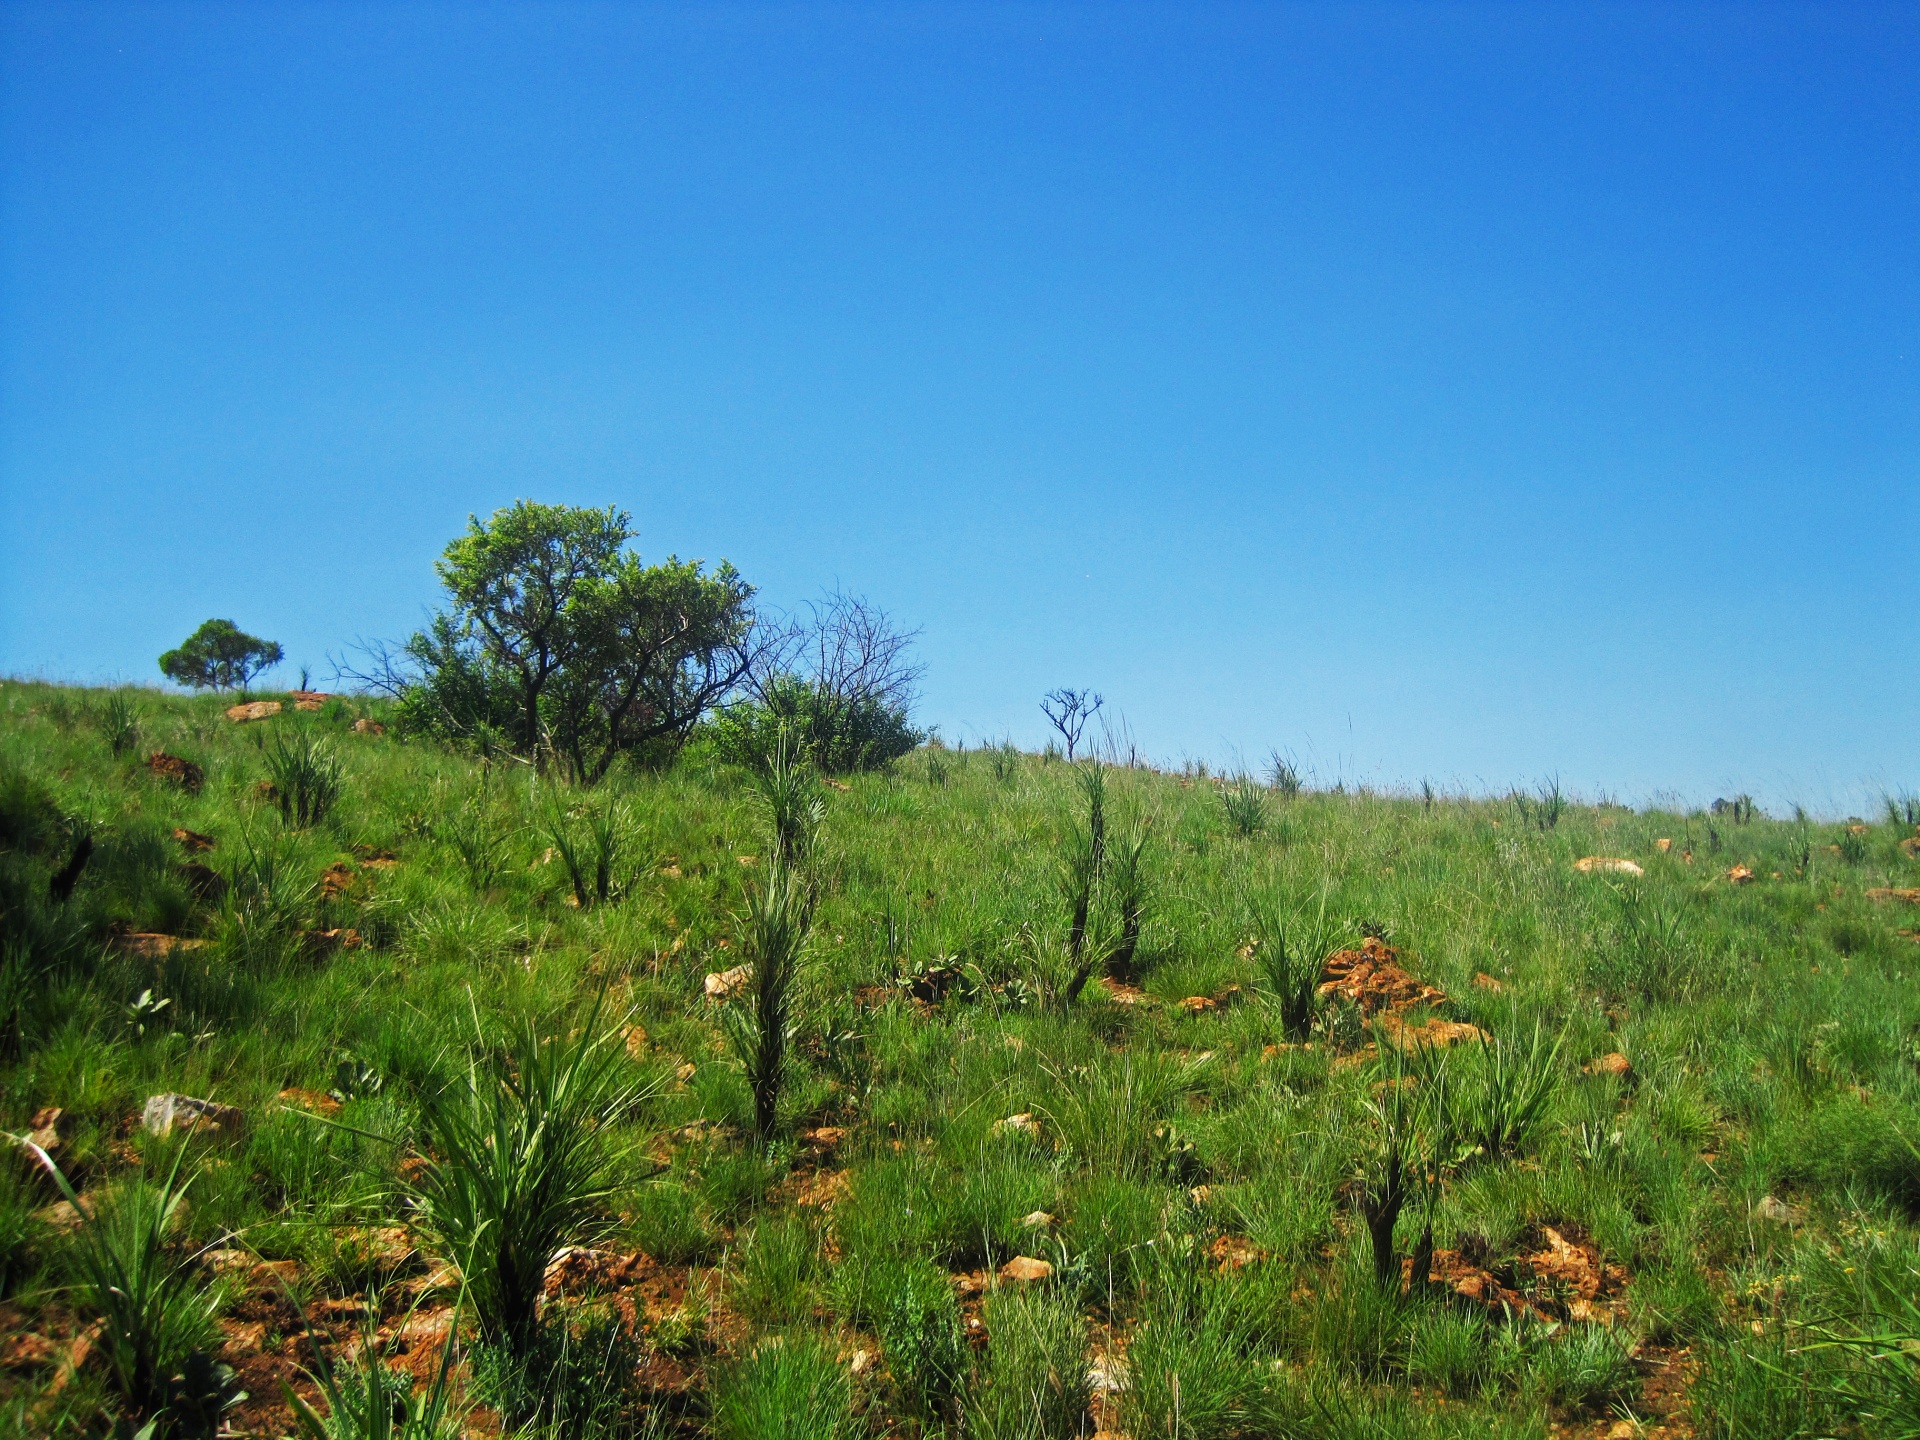 slope of a green vegetation covered hill in a south african landscape